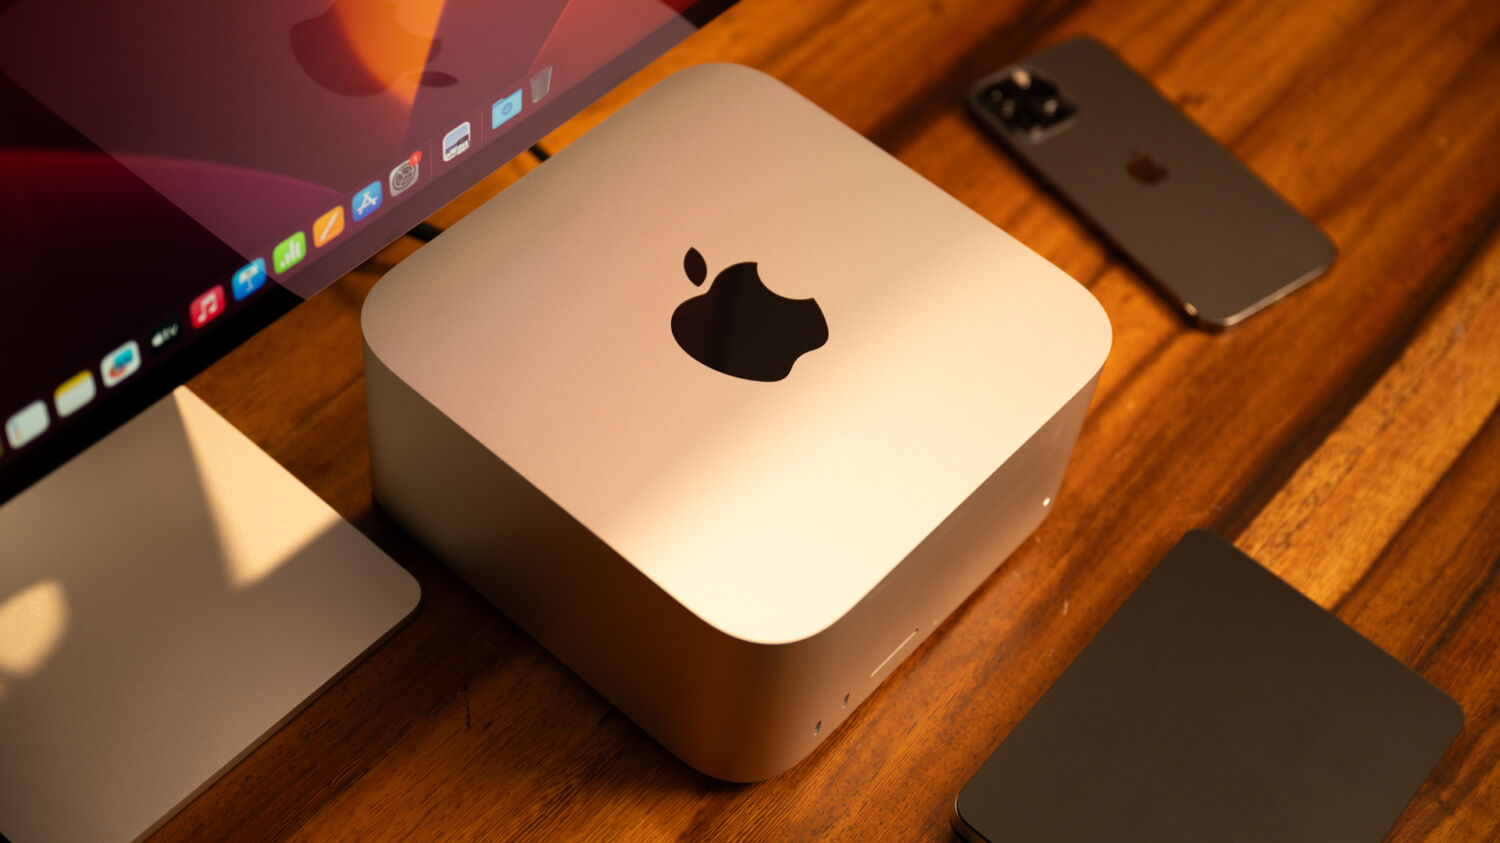 Mac Studio with M2 Ultra review: For creative professionals only